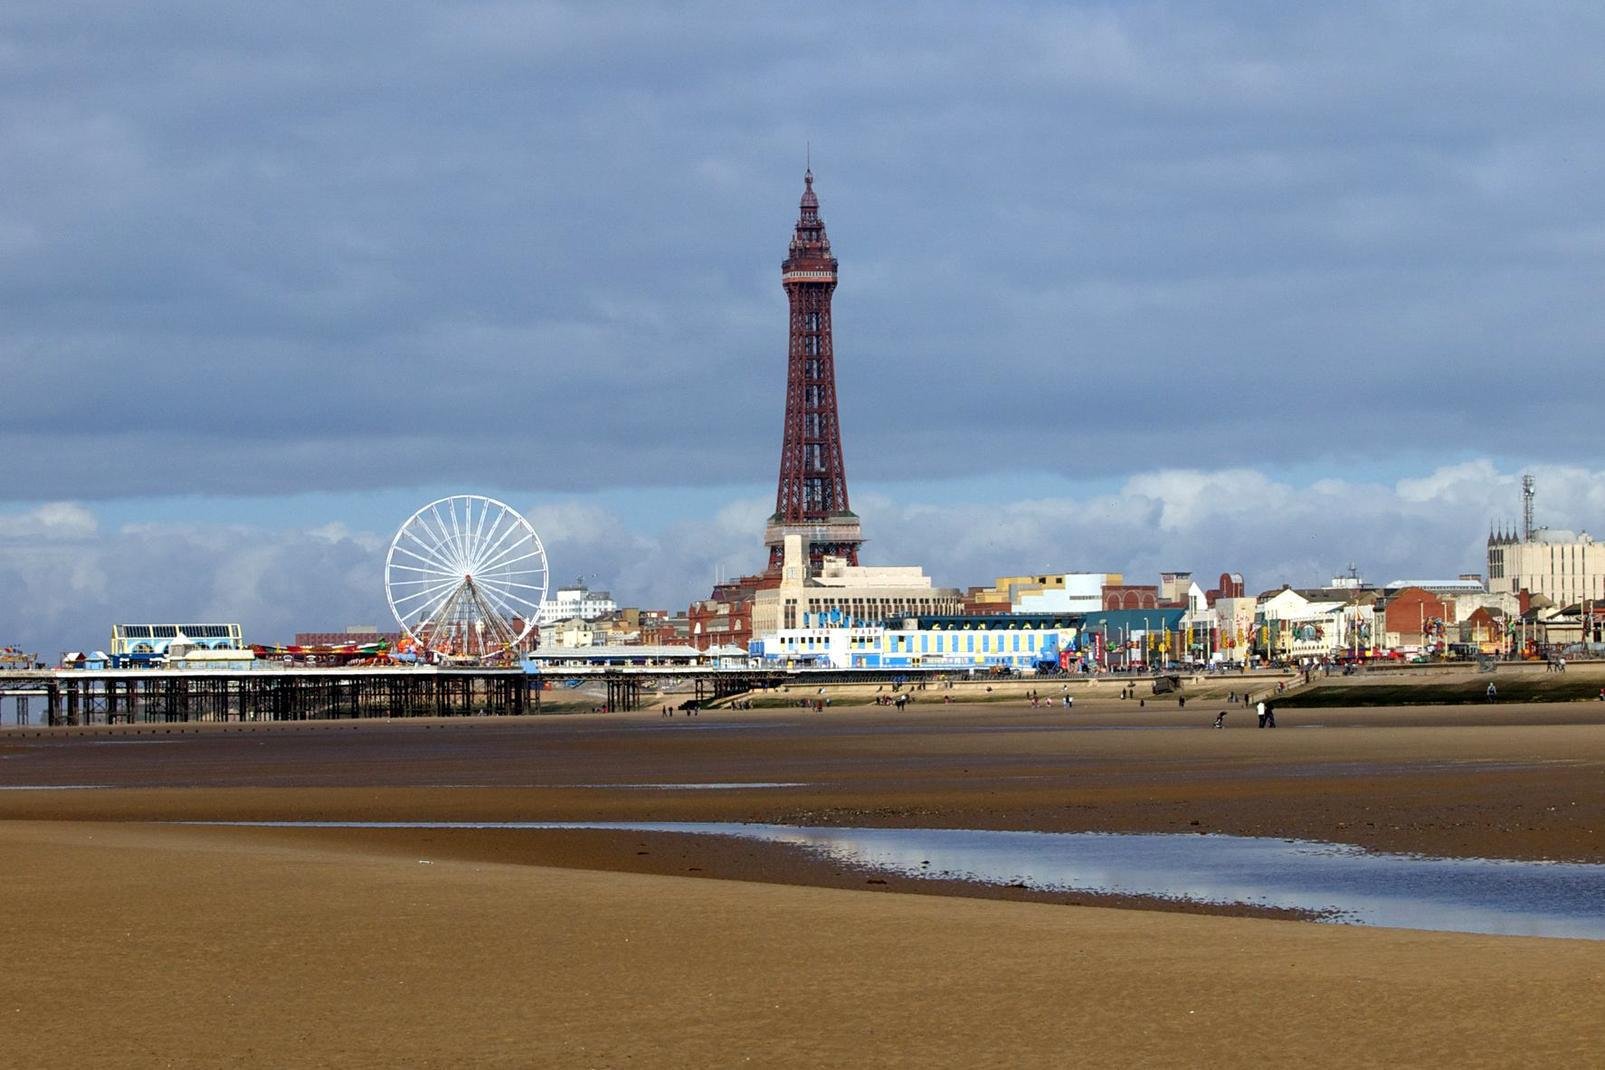 Blackpool is what it is. A little rough around the edges, but unashamedly fun. A city of dated glory, think garish amusements, ballrooms and beach accompanied by the sound of the ice cream van. With three piers, 42 acres of rides and 6 km of illumination, Blackpool is not lacking in traditional holiday-by-the-sea attractions. Although the famous seaside city is often thought of as tainted, and could ...